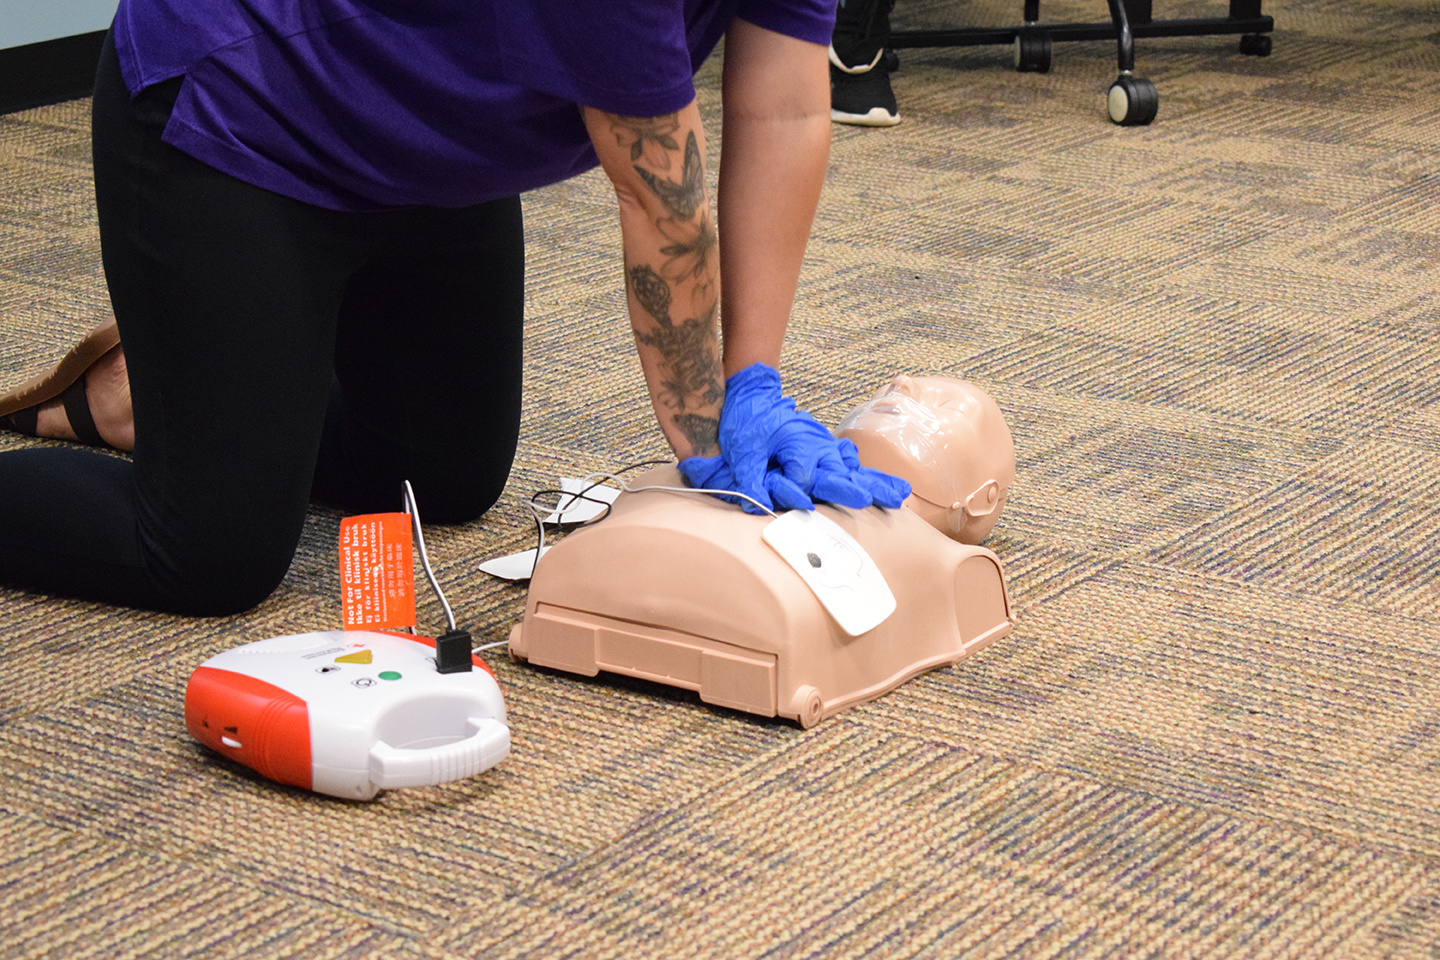 practicing on a cpr dummy